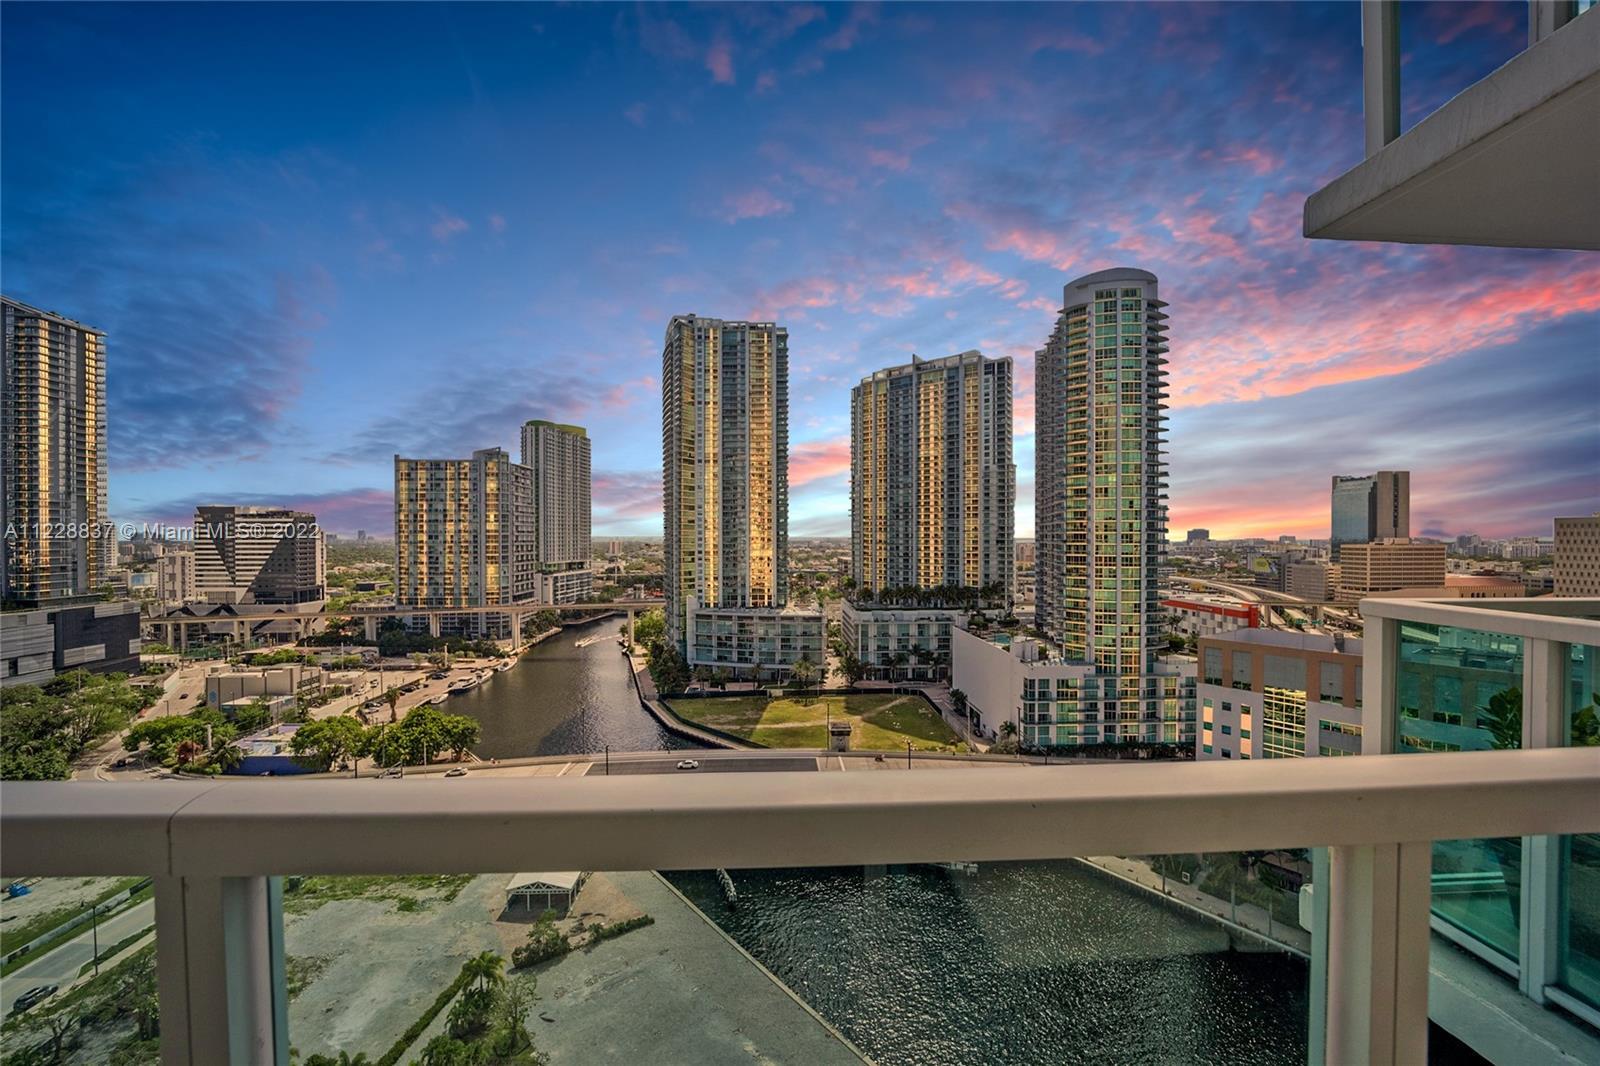 Brickell's BEST location! Directly on the iconic Miami River! Spacious, nearly 800 SqFt, 1-bedroom i